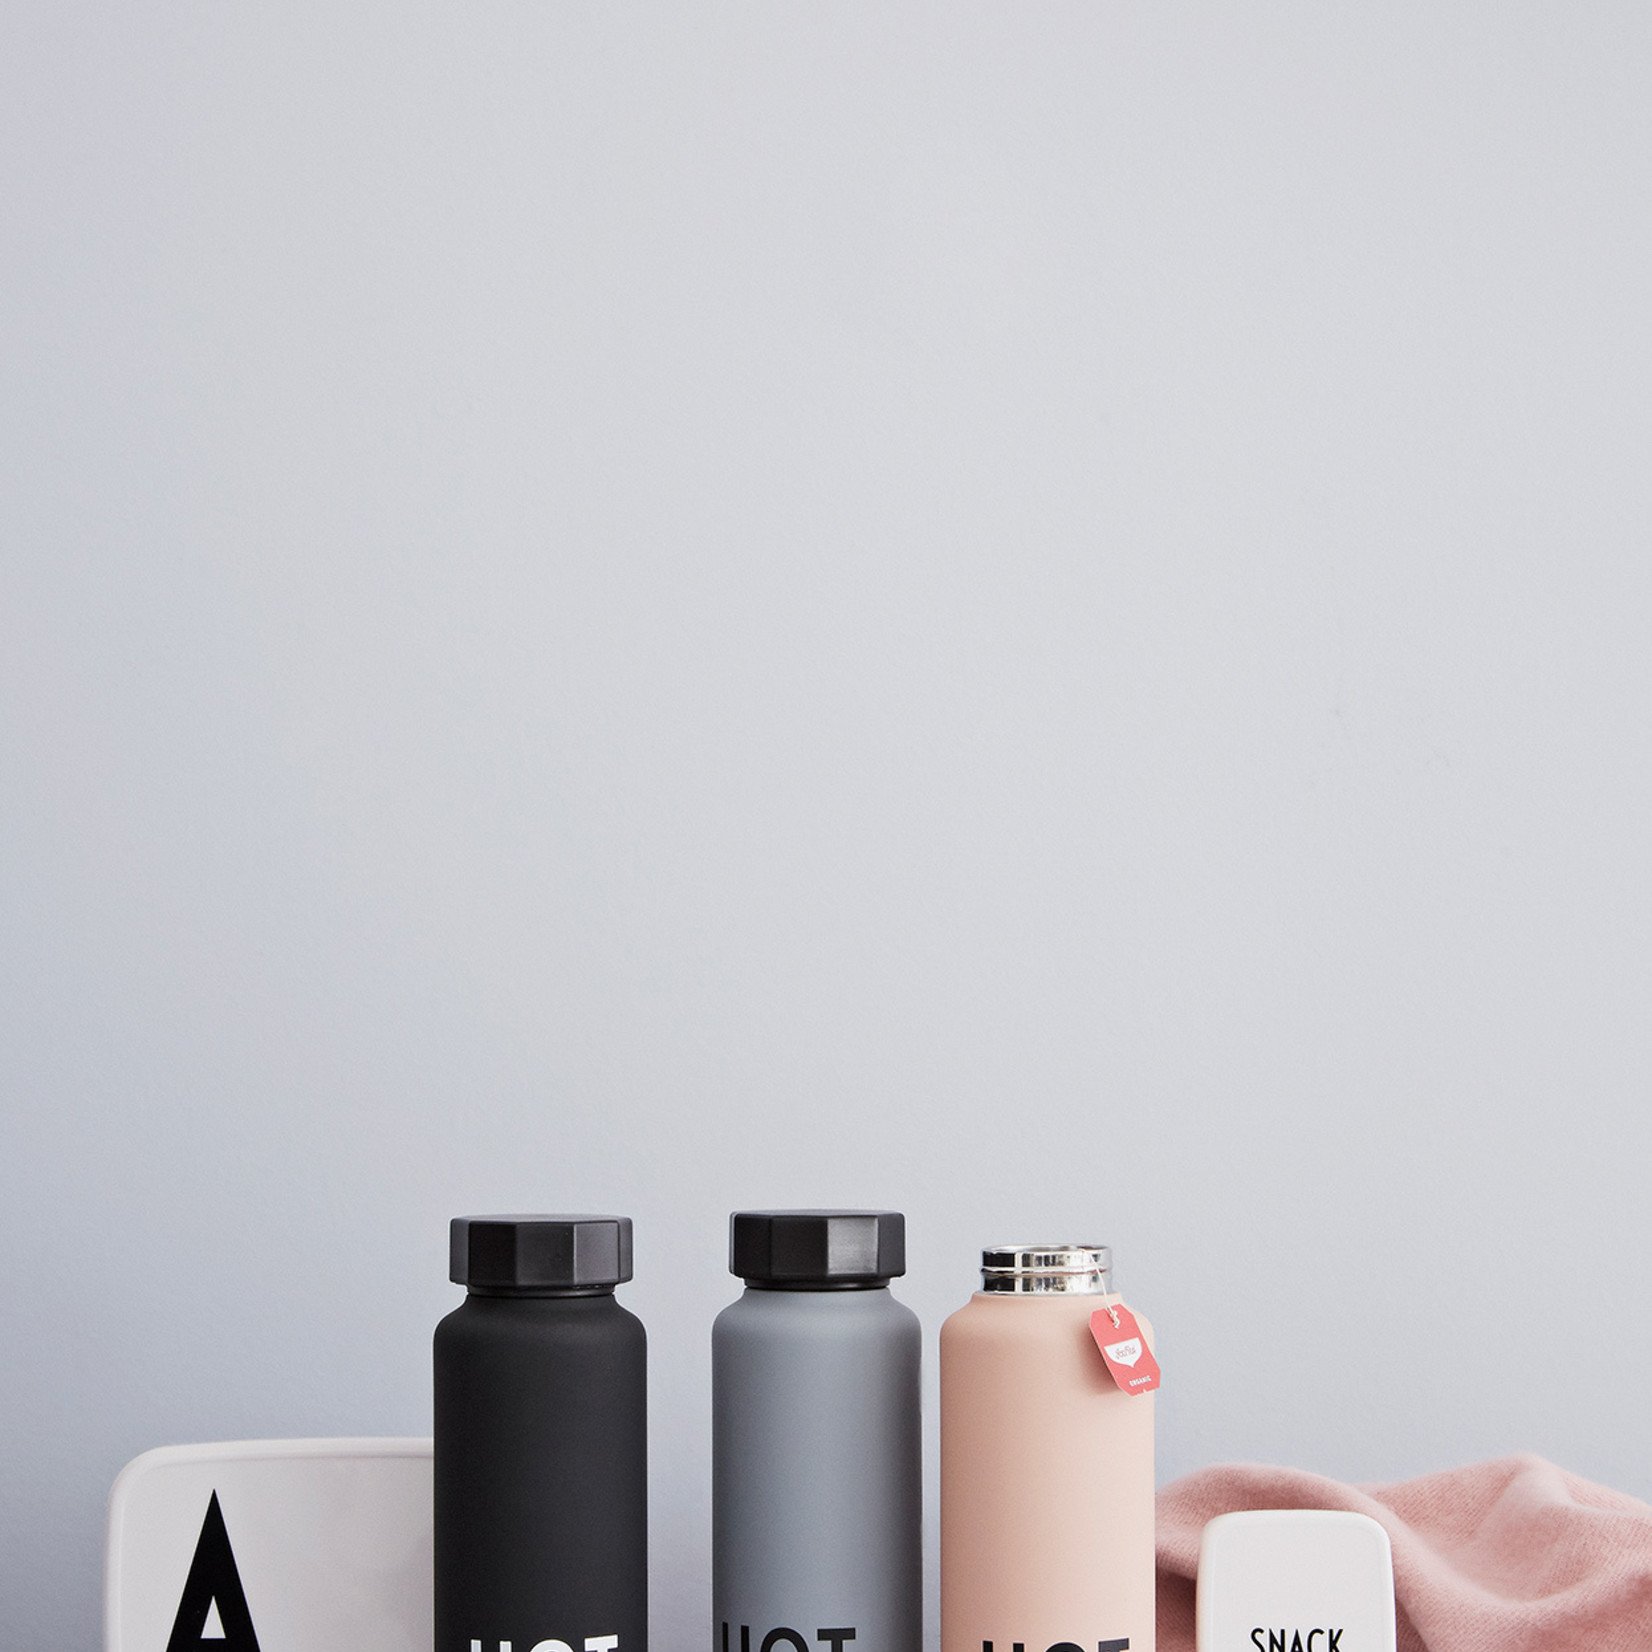 https://cdn.webshopapp.com/shops/293779/files/314986861/1652x1652x1/design-letters-thermo-insulated-bottle-black-hot.jpg